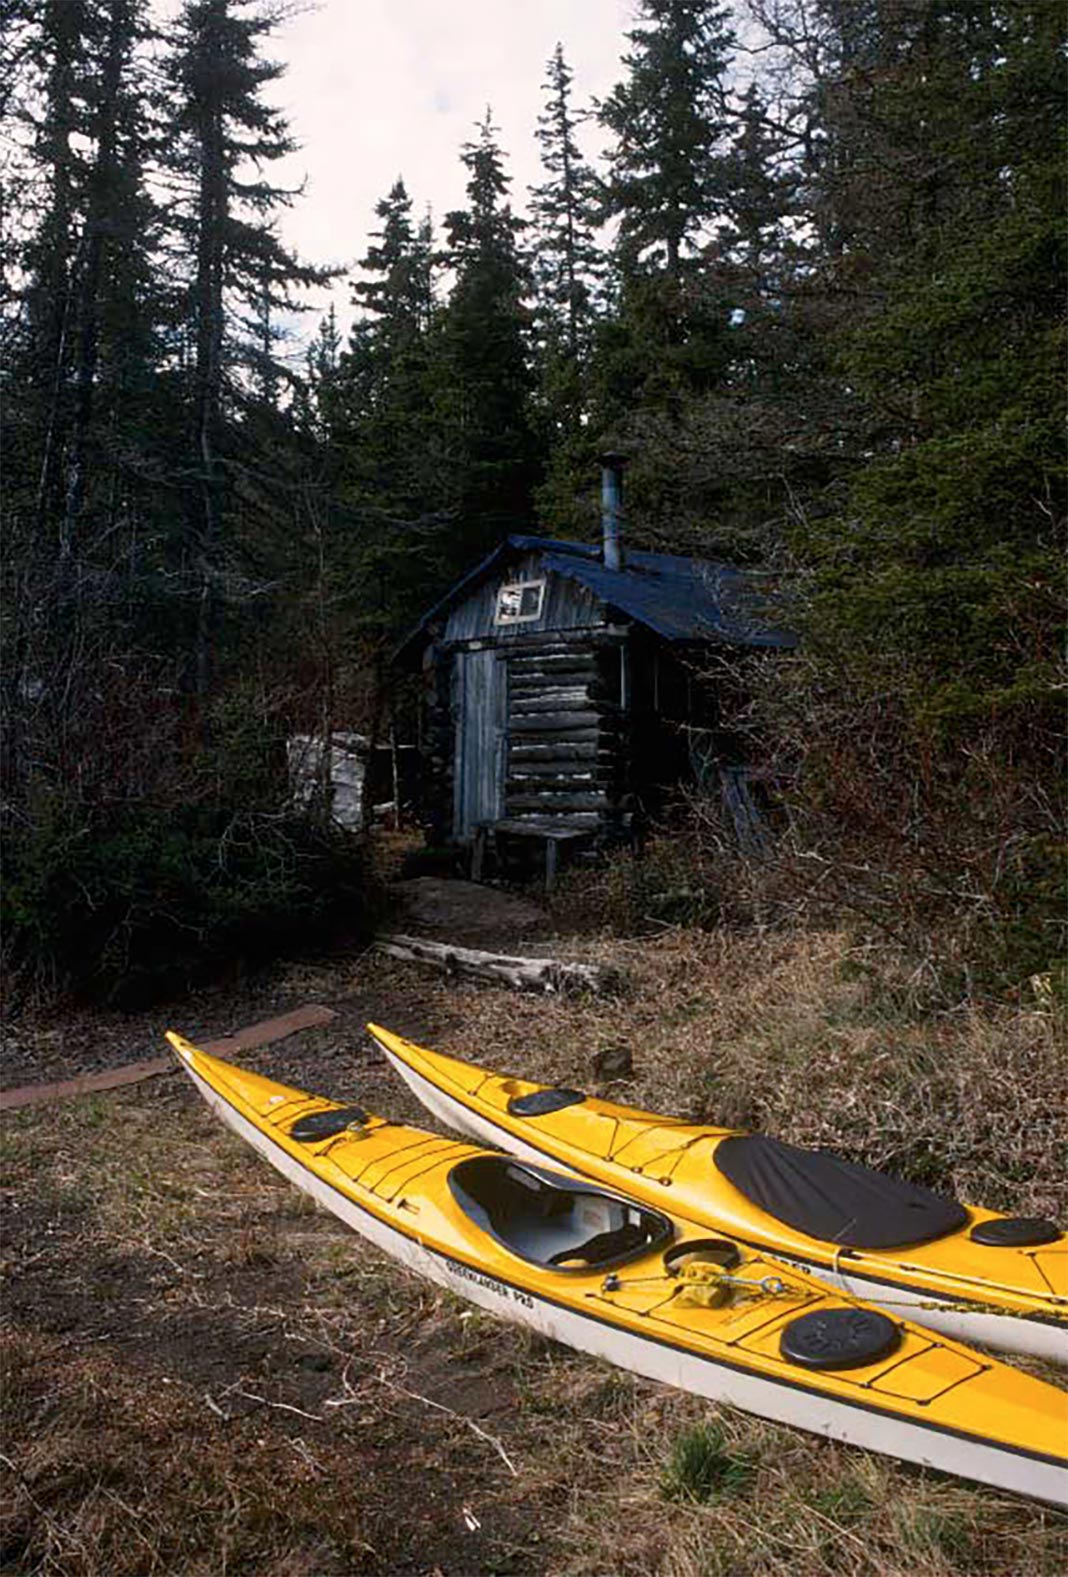 Two yellow sea kayaks lie outside small cabin in the woods